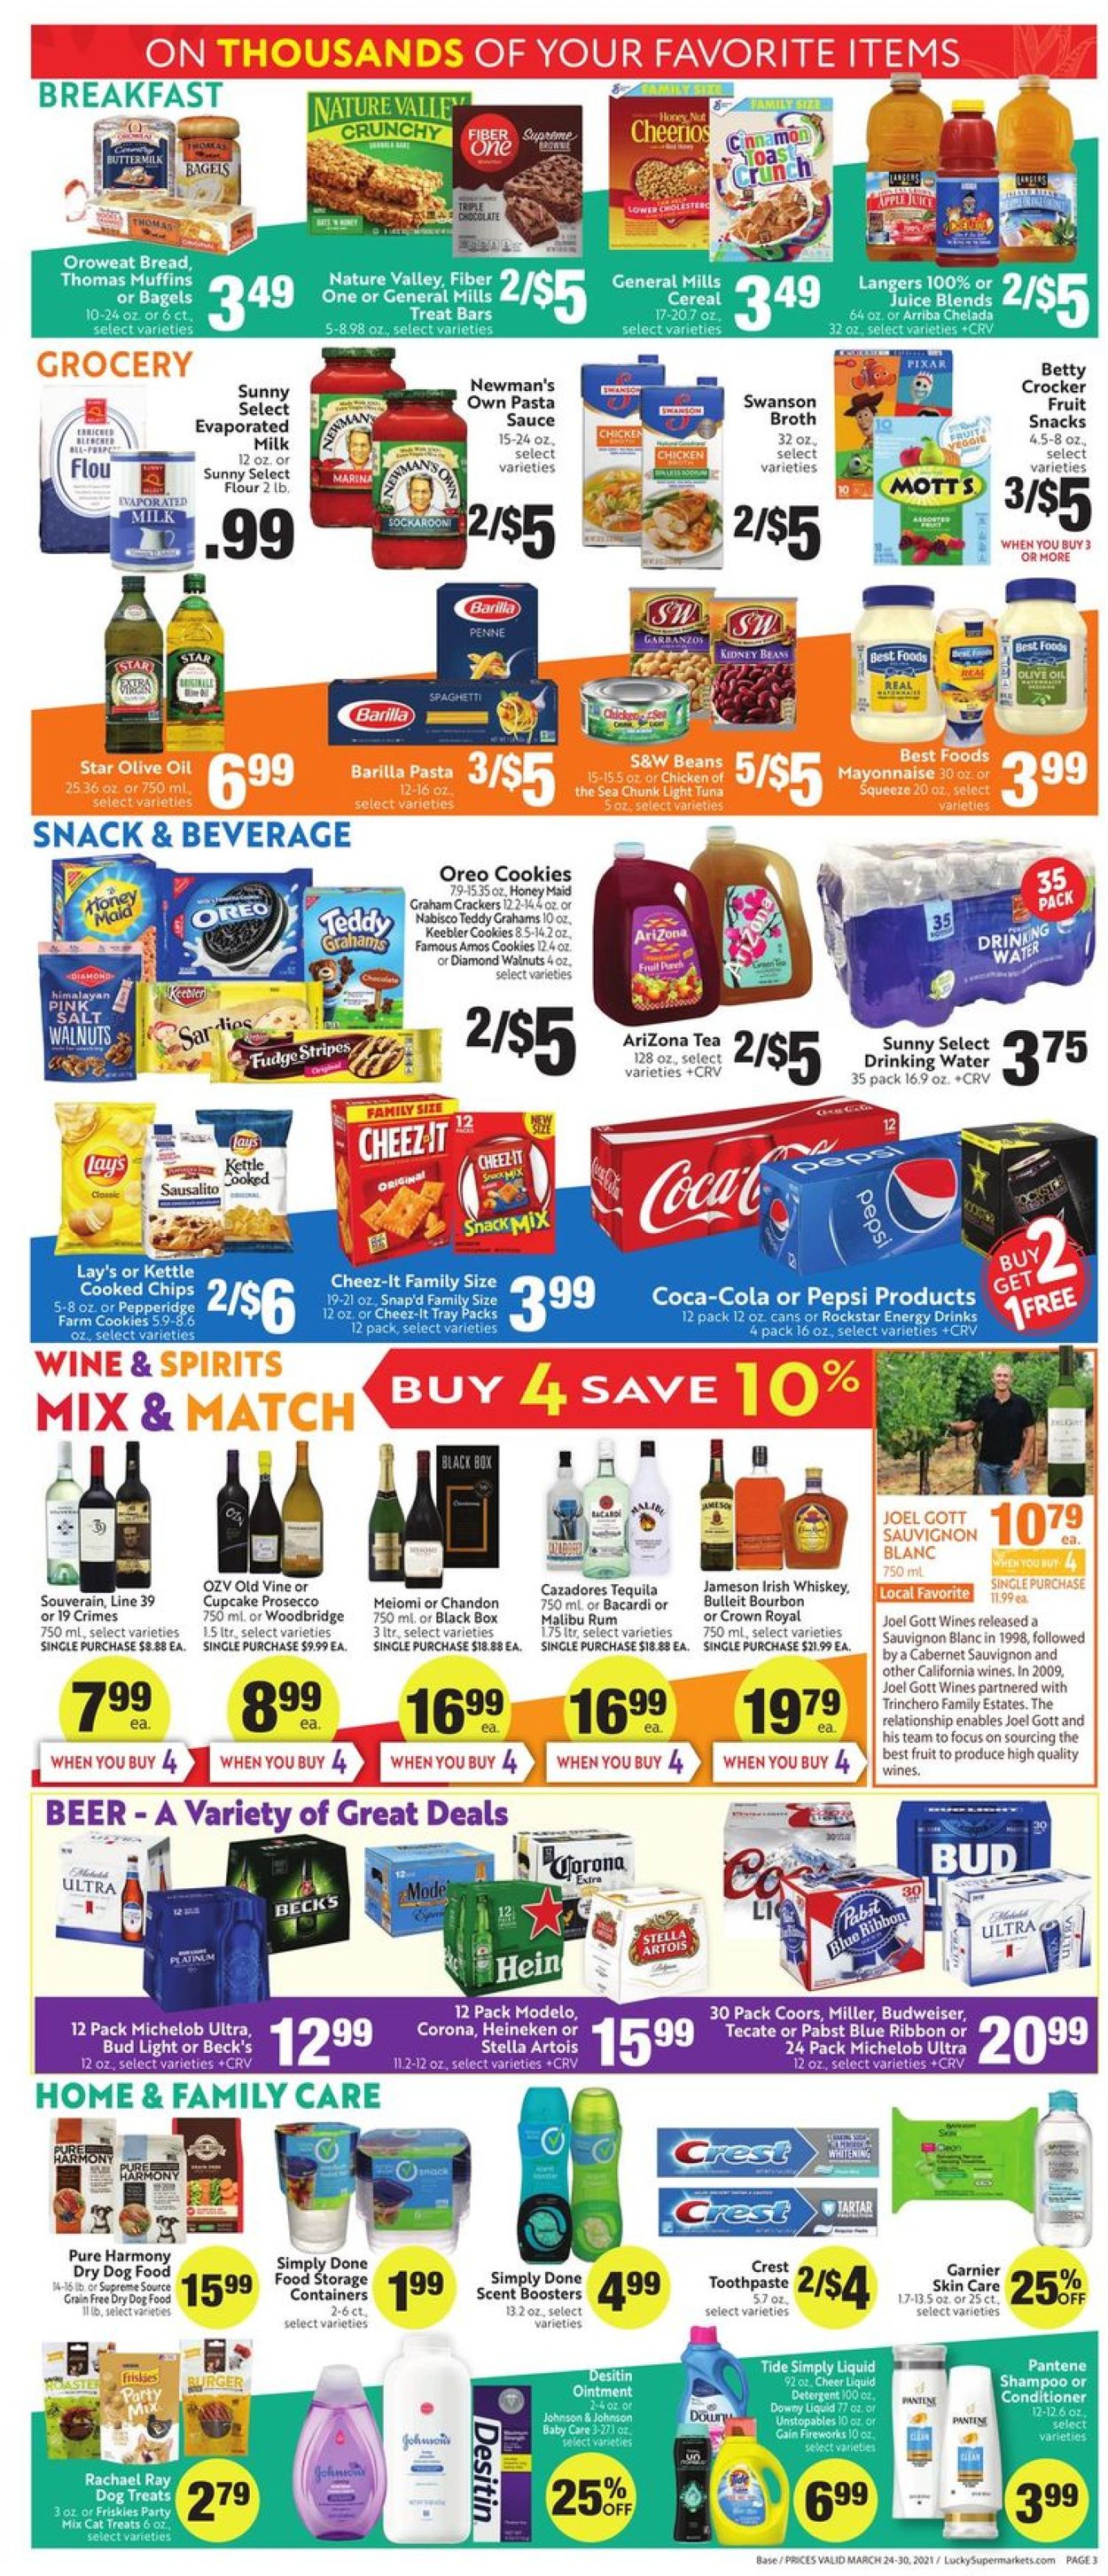 Lucky Supermarkets - Easter 2021 Weekly Ad Circular - valid 03/24-03/30/2021 (Page 3)